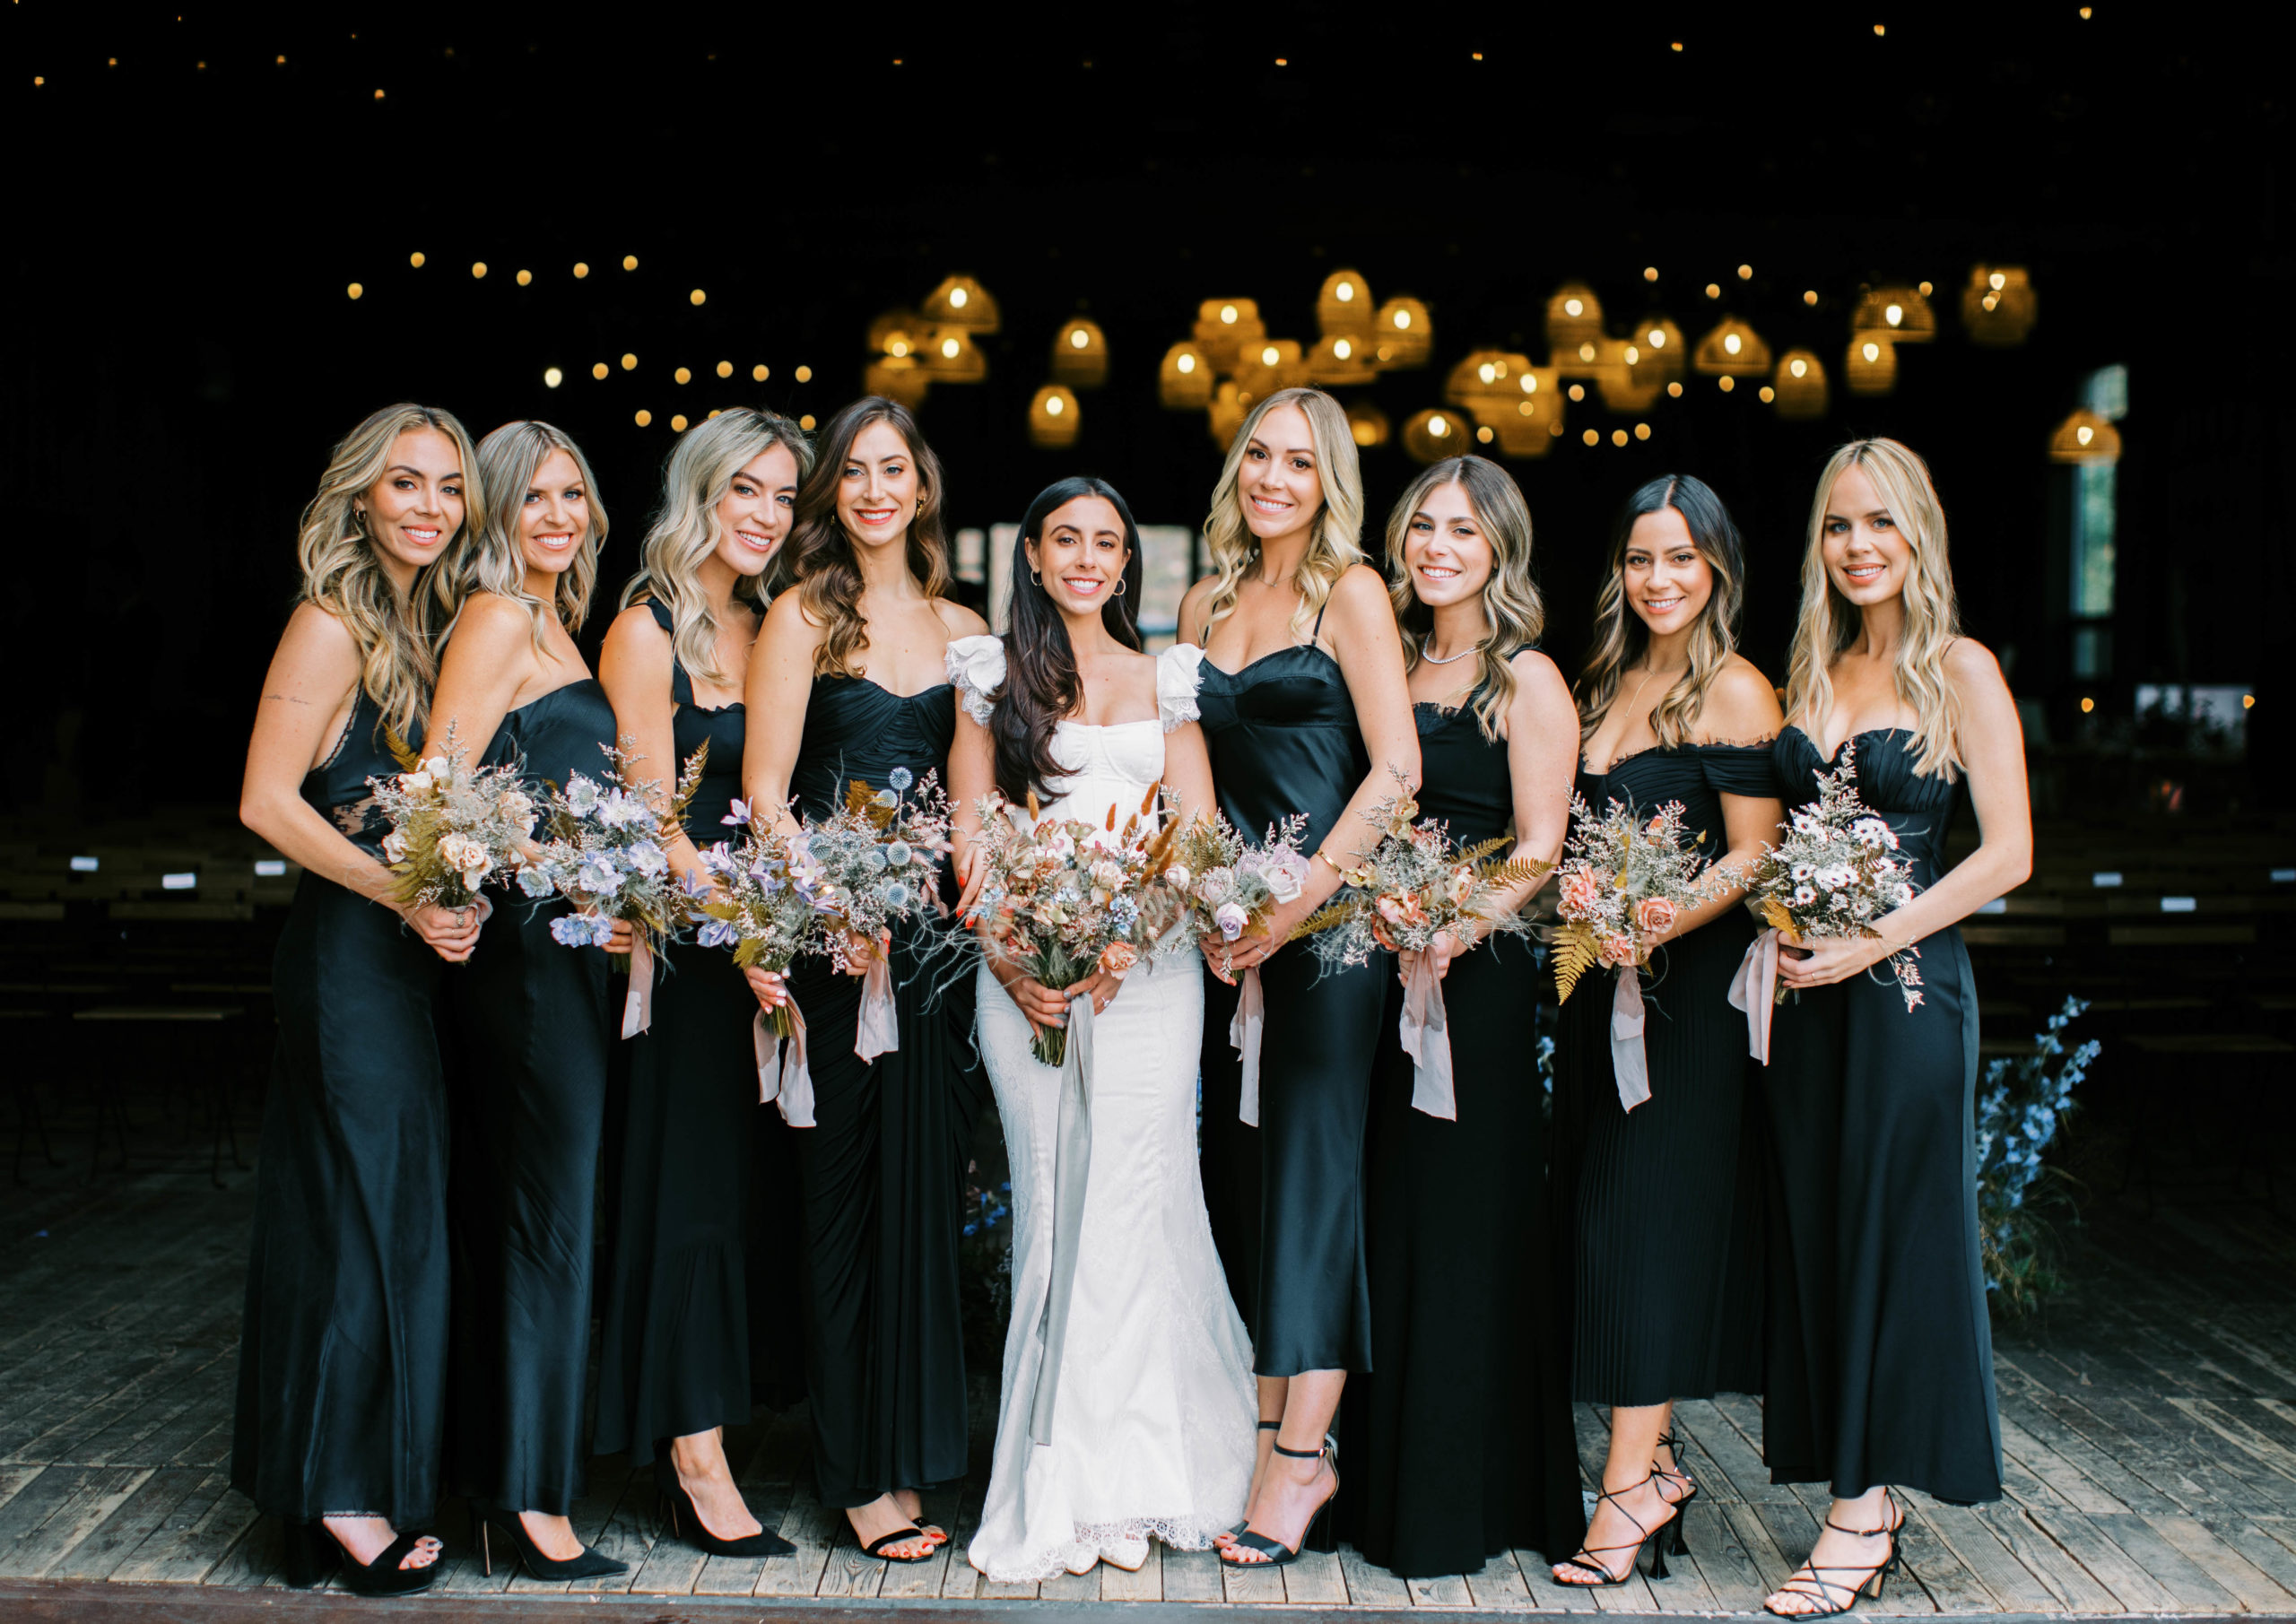 an image of a bride posing with her bridesmaids at this eclectic ranch wedding in utah at the lodge at blue sky. the bridesmaids wear mismatched black bridesmaids dresses and carry eclectic bouquets